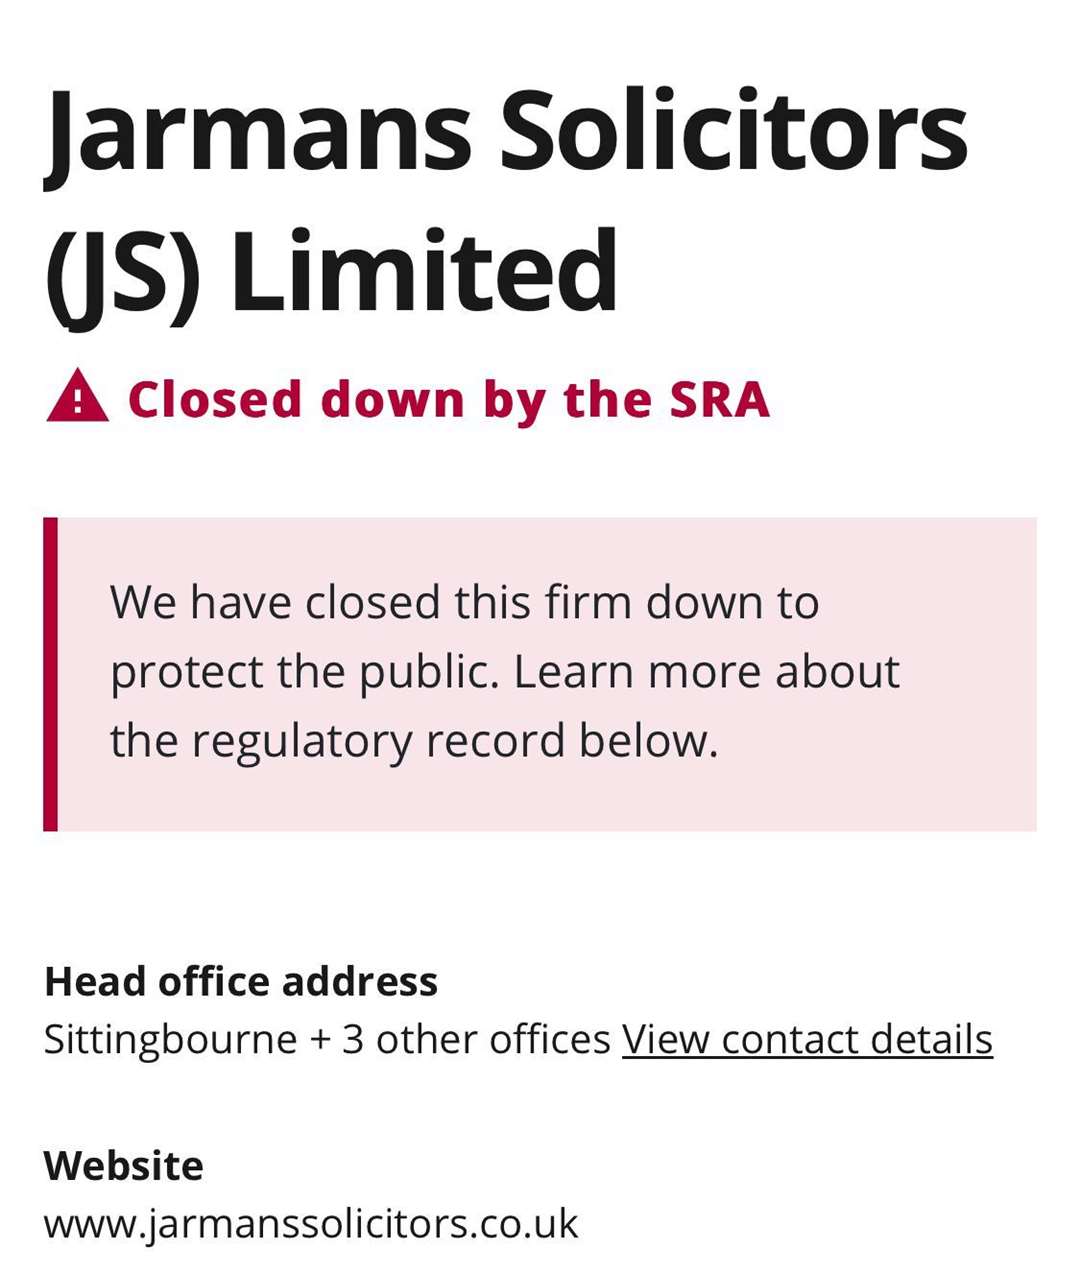 The announcement on the SRA's website about Jarmans Solicitors in Sittingbourne